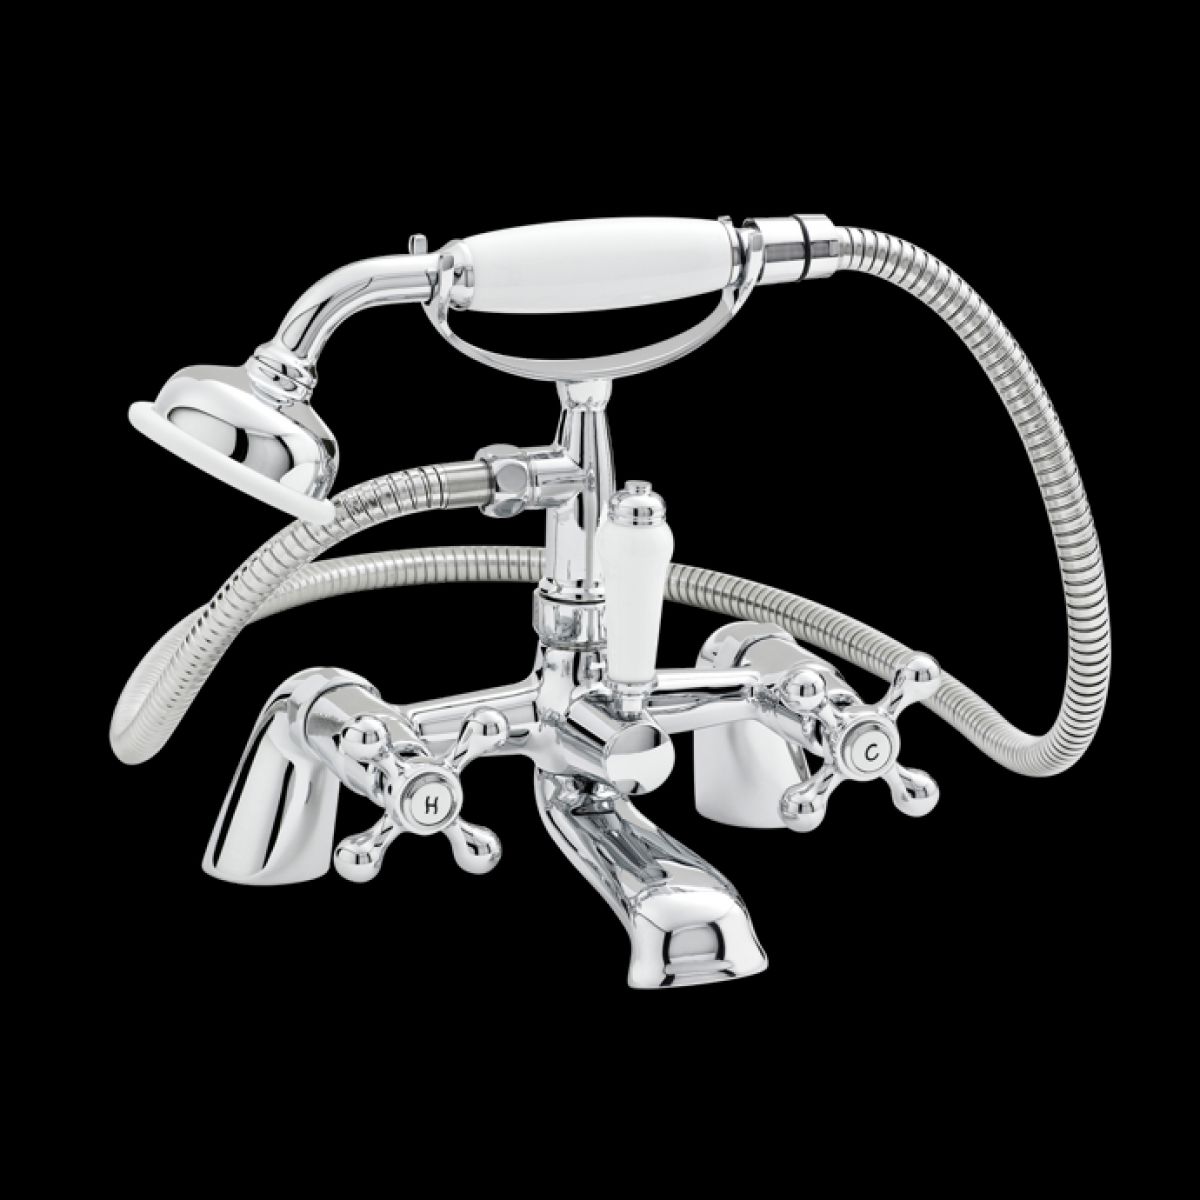 Essentials Viscount Deck Mounted Bath/Shower Mixer with Large Handset - Chrome/White